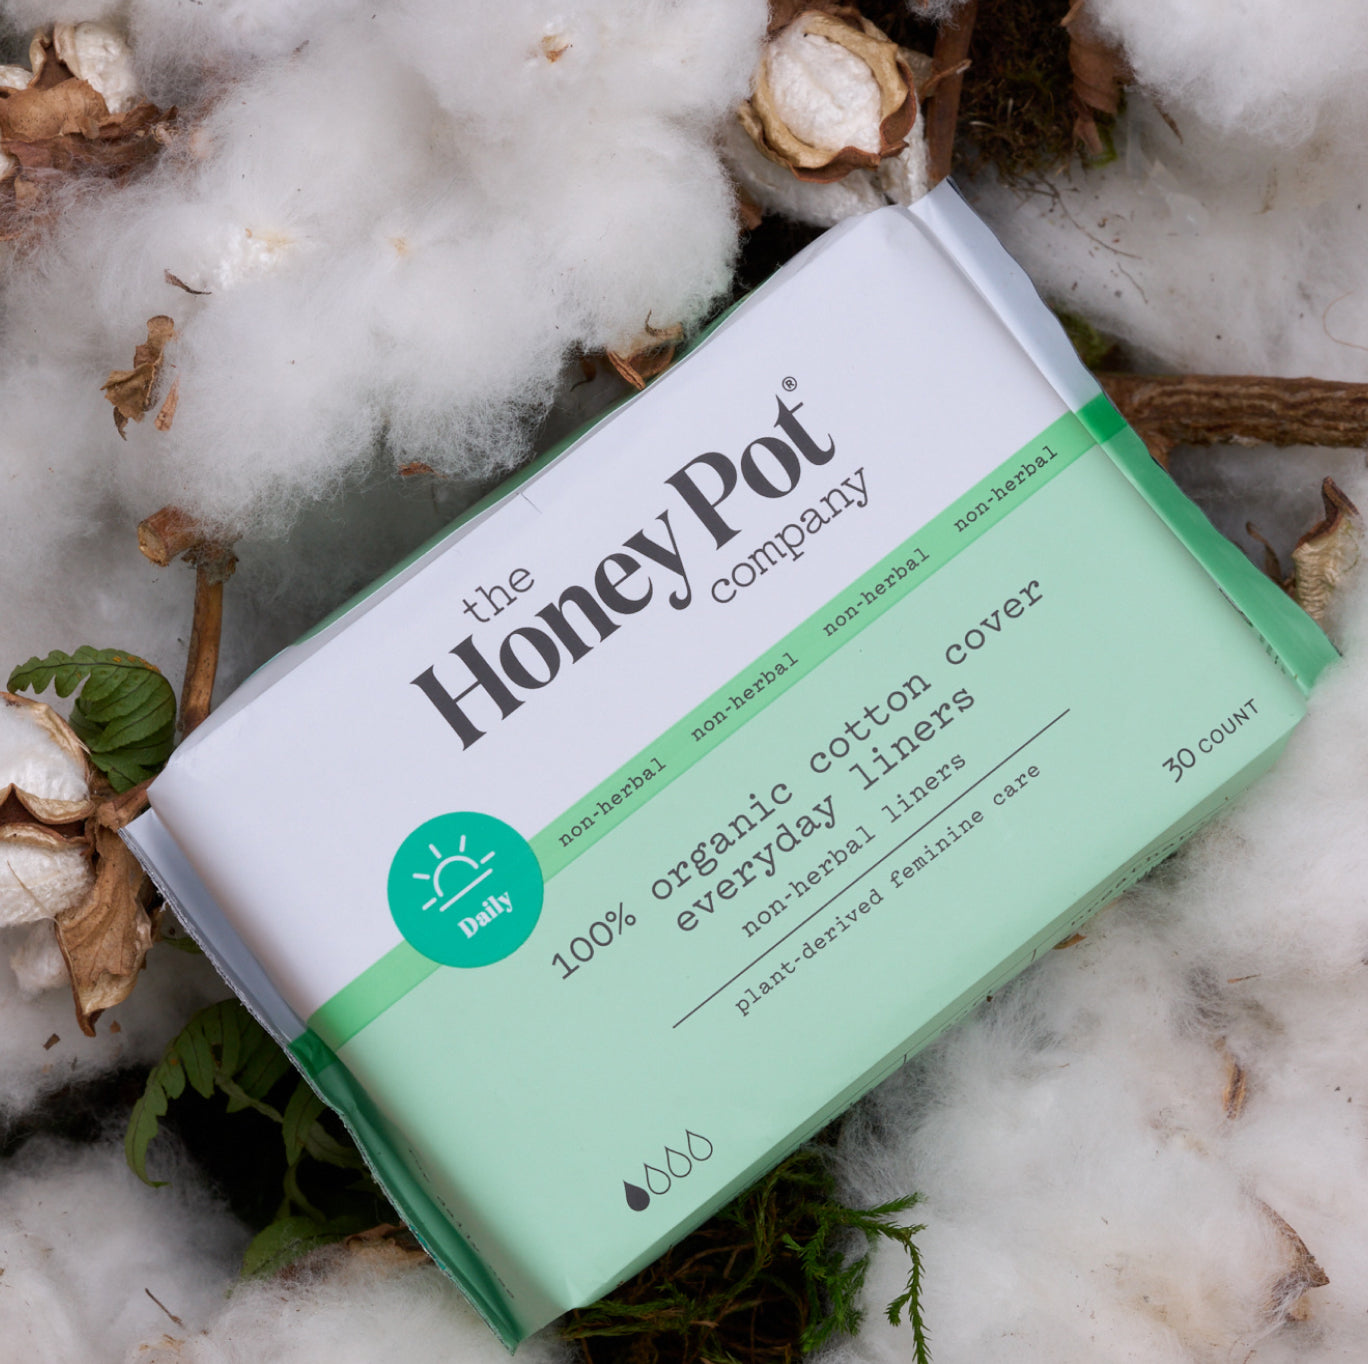 The Honey Pot Company Everyday Panty Liners, Herbal-Infused Clean Cotton  Pantiliners, Plant-Derived Feminine & Menstrual Care, Green, Pantiliner, 30